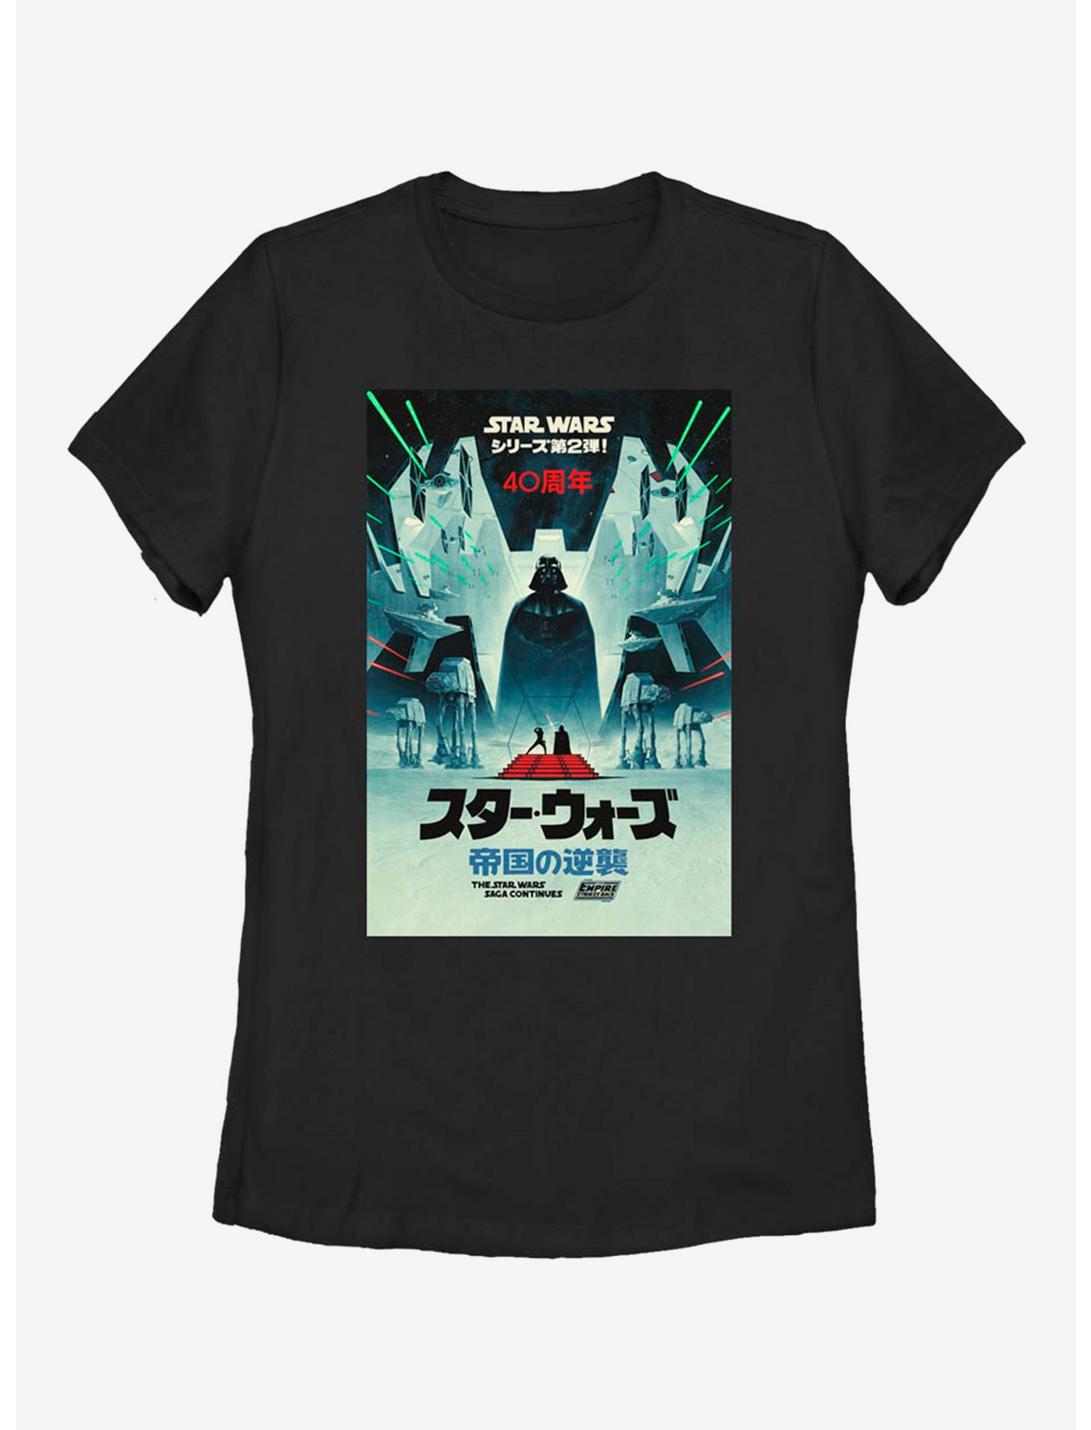 Plus Size Star Wars Episode V: The Empire Strikes Back 40th Anniversary Japanese Poster Womens T-Shirt, BLACK, hi-res